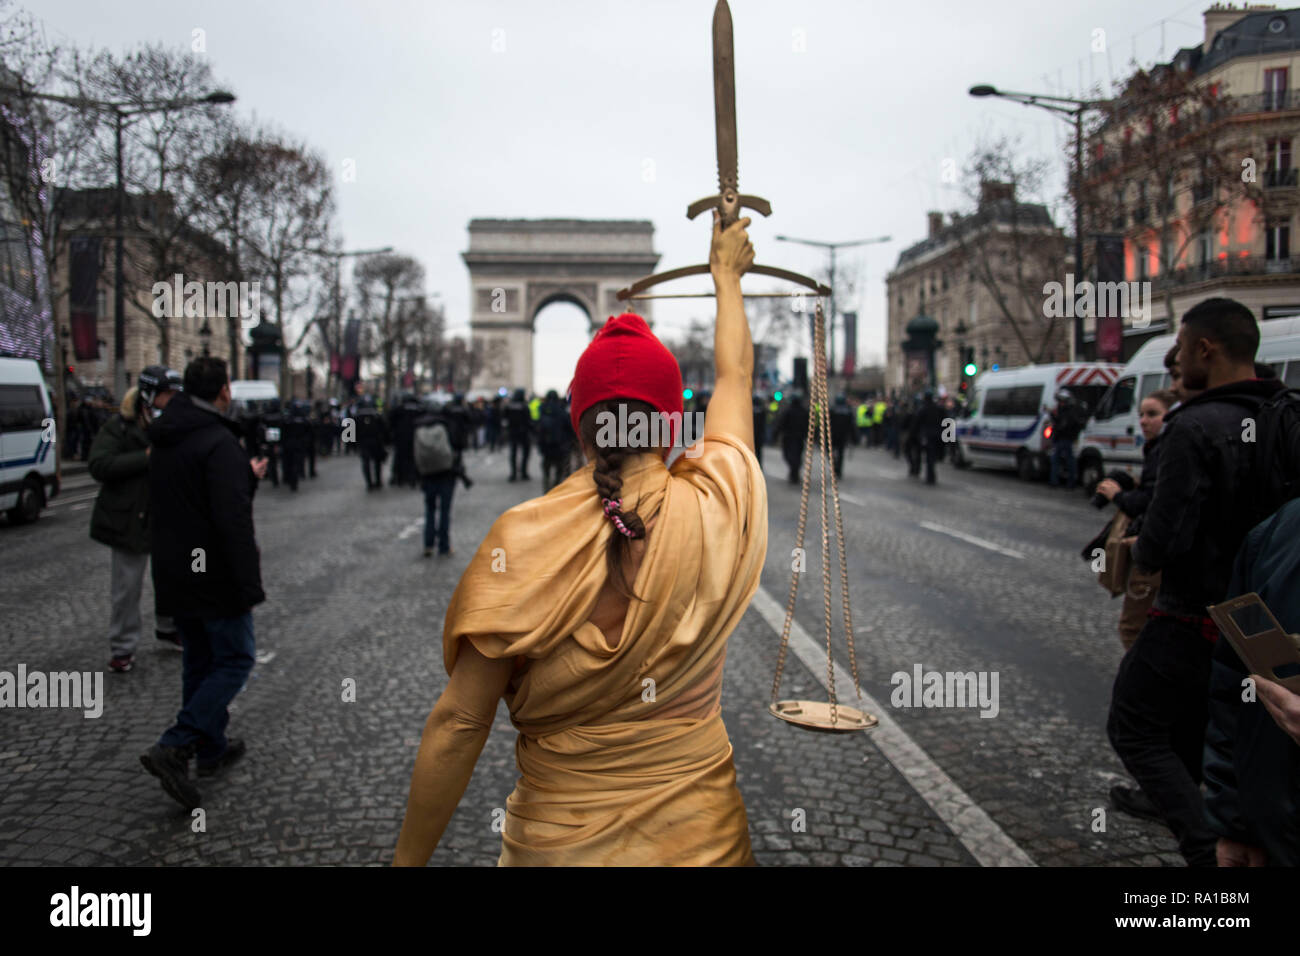 A woman dress as the French Republic national symbol 'La Marianne' seen at  the Champs Elysee during the protest. Yellow vest protestors gathered and  marched on the streets of Paris another Saturday